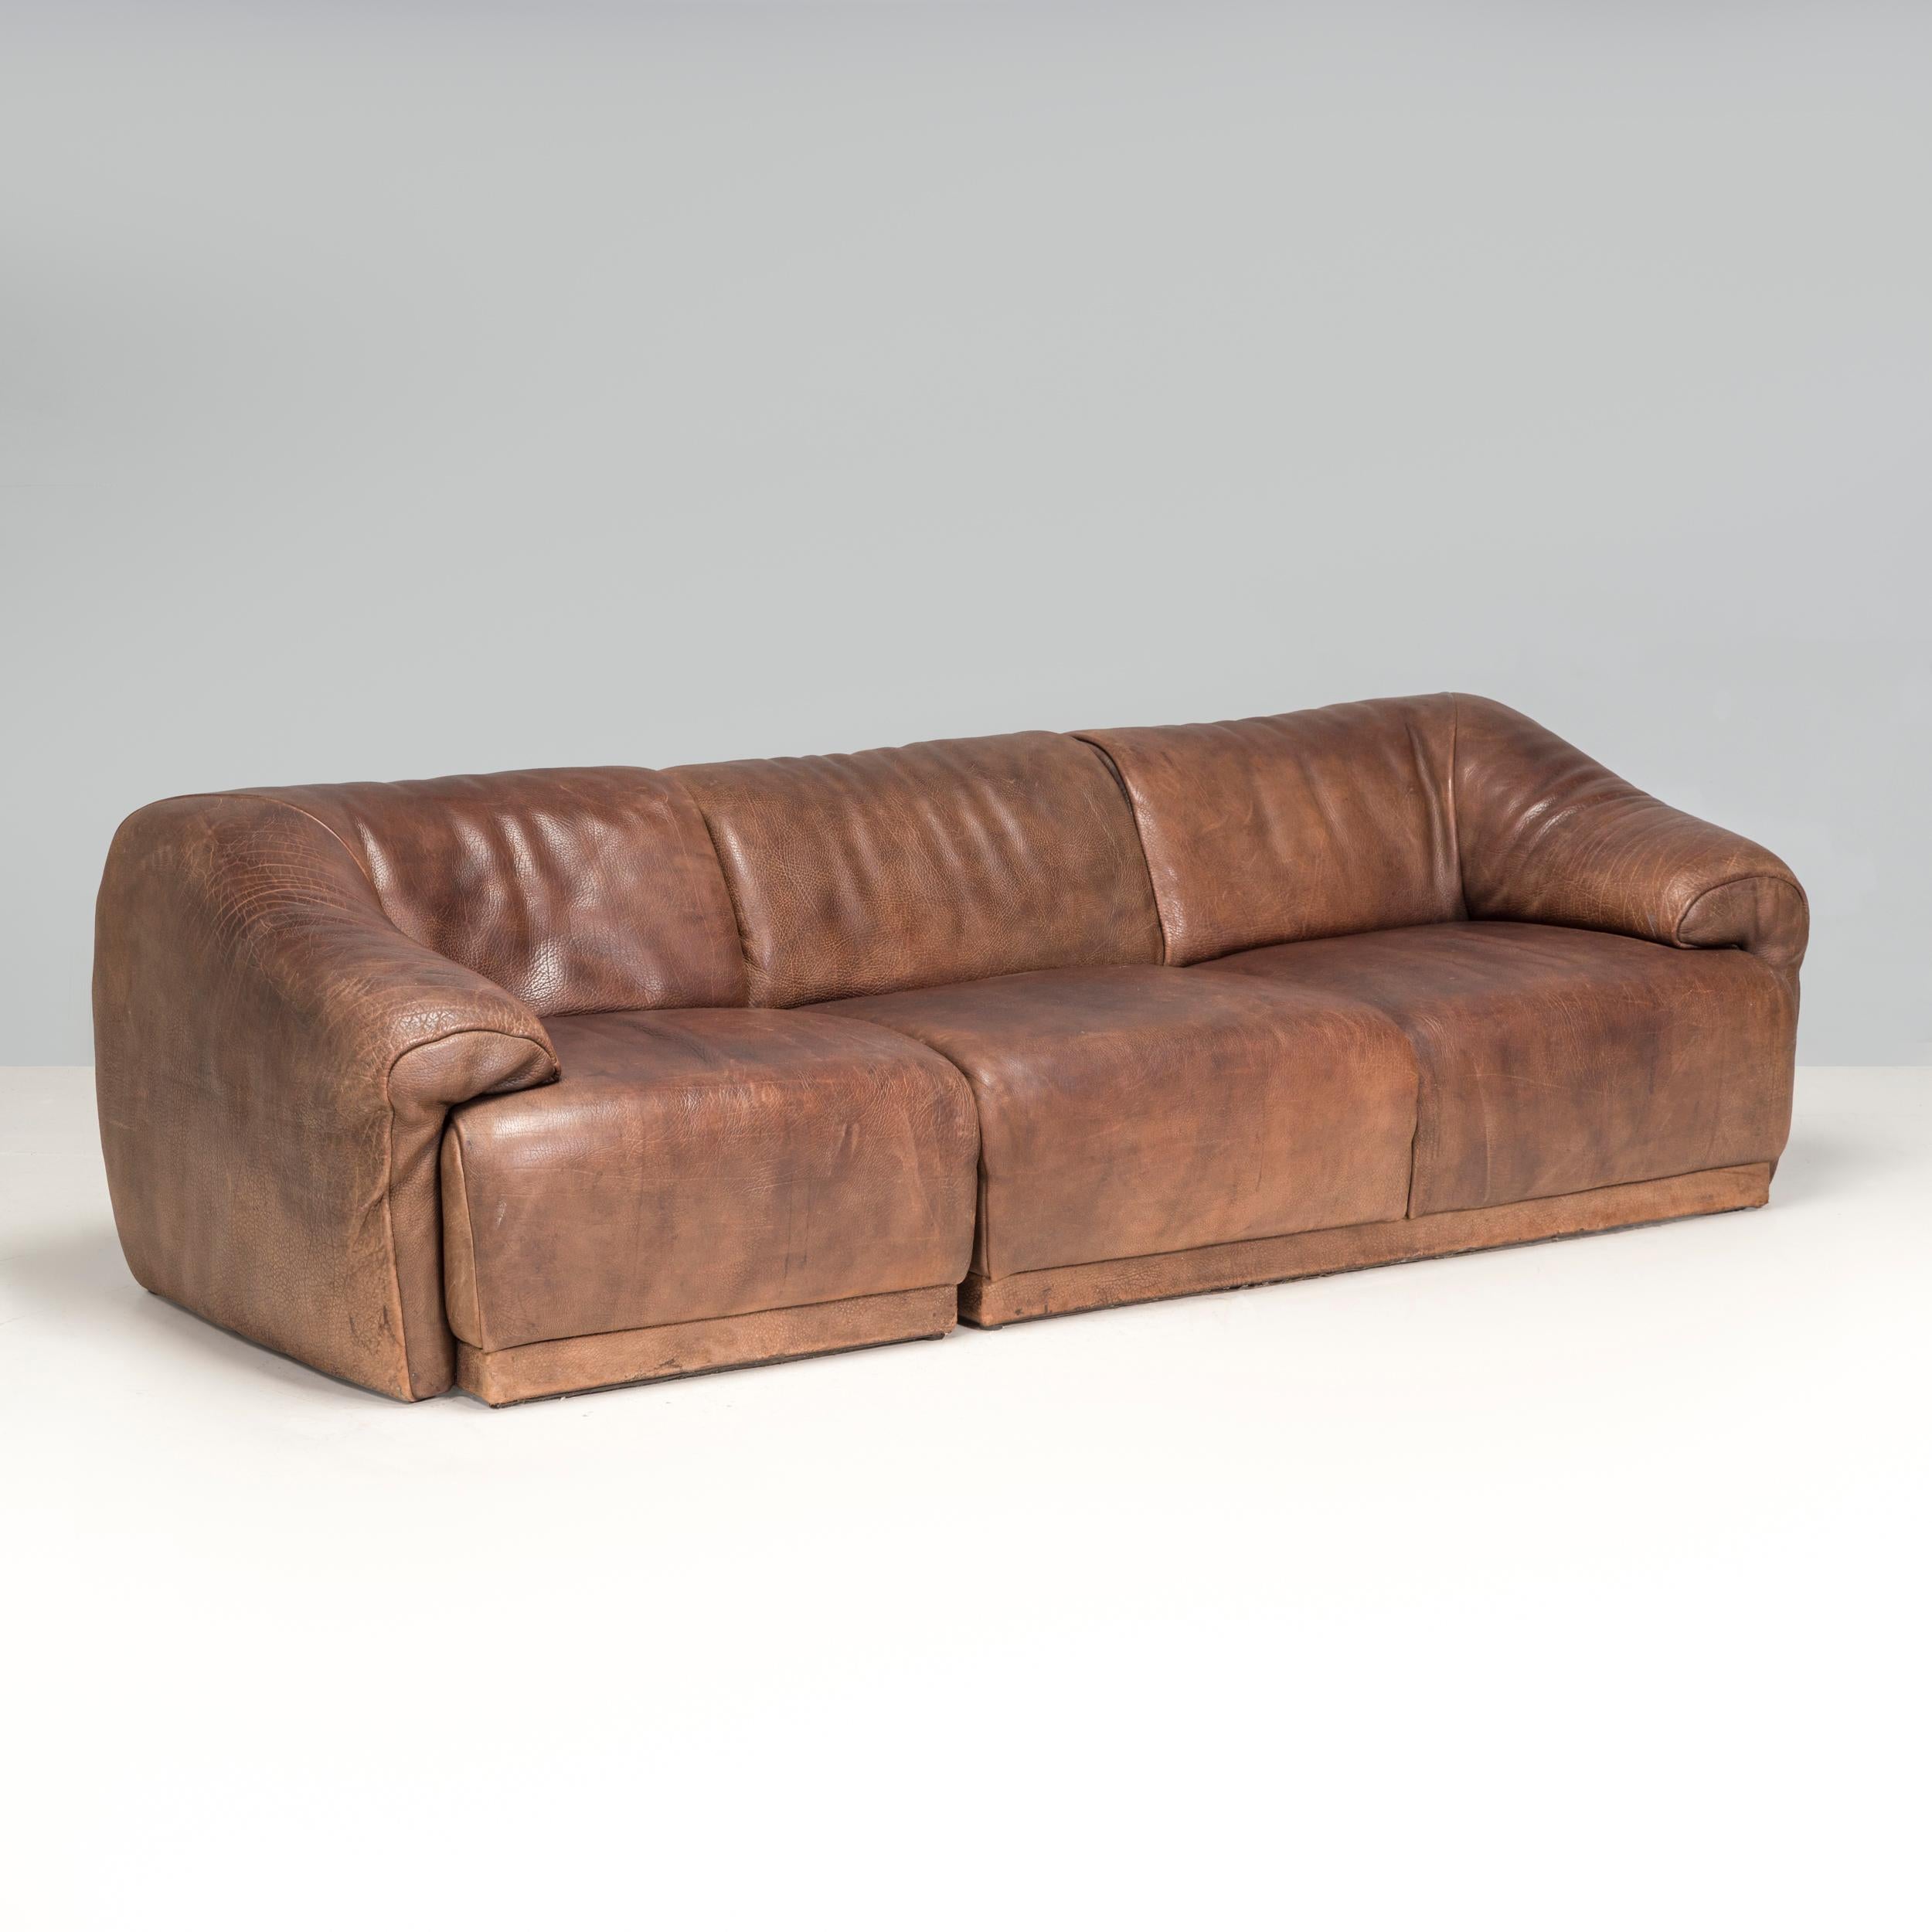 Swiss De Sede Brown Buffalo Leather Three Seater, 1970s For Sale